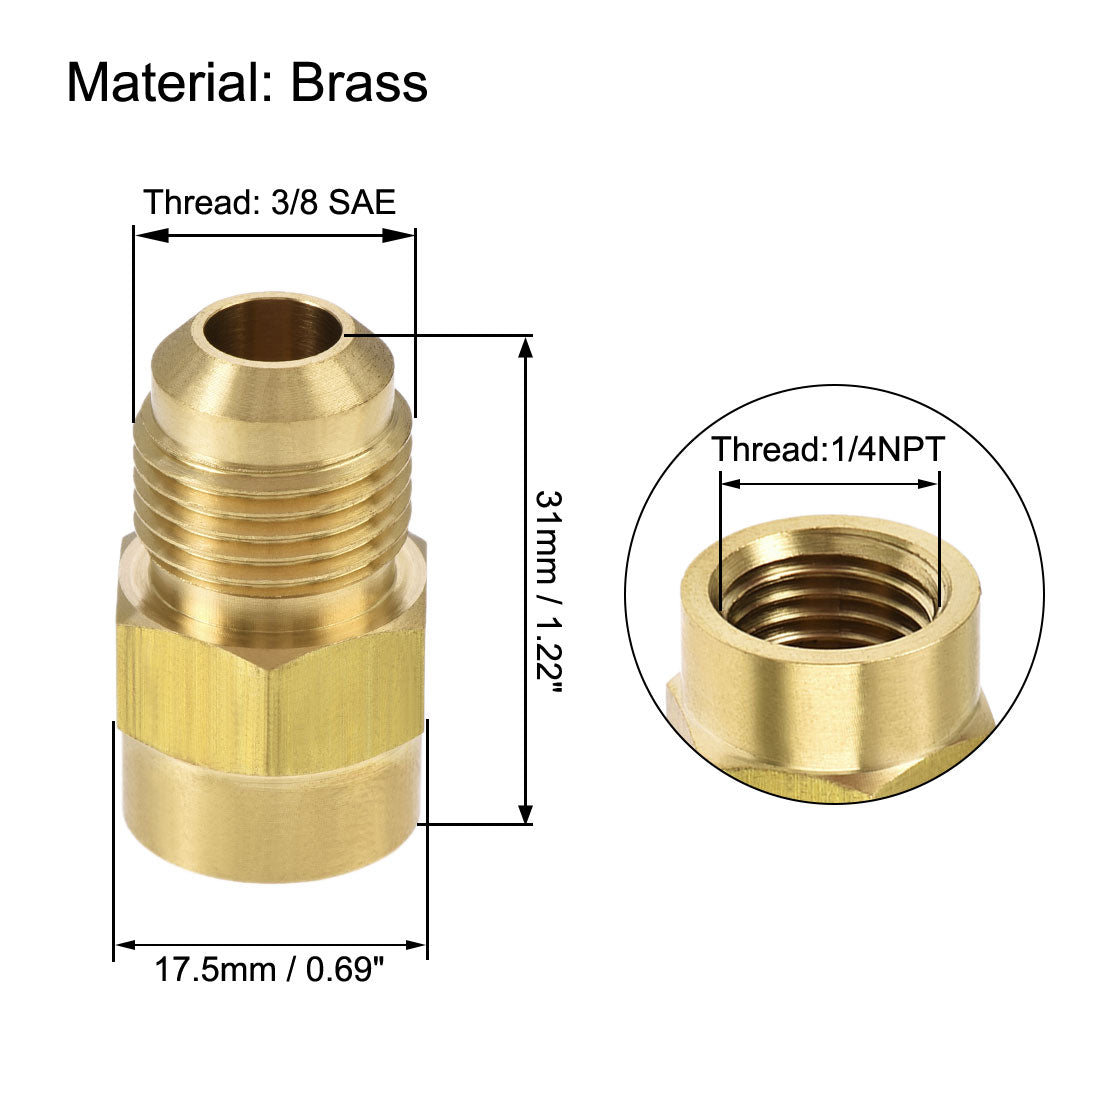 Uxcell Uxcell Brass Pipe fitting, 1/4 SAE Flare Male to 1/4NPT Female Thread, Tubing Adapter Hose Connector, for Air Conditioner Refrigeration, 2Pcs